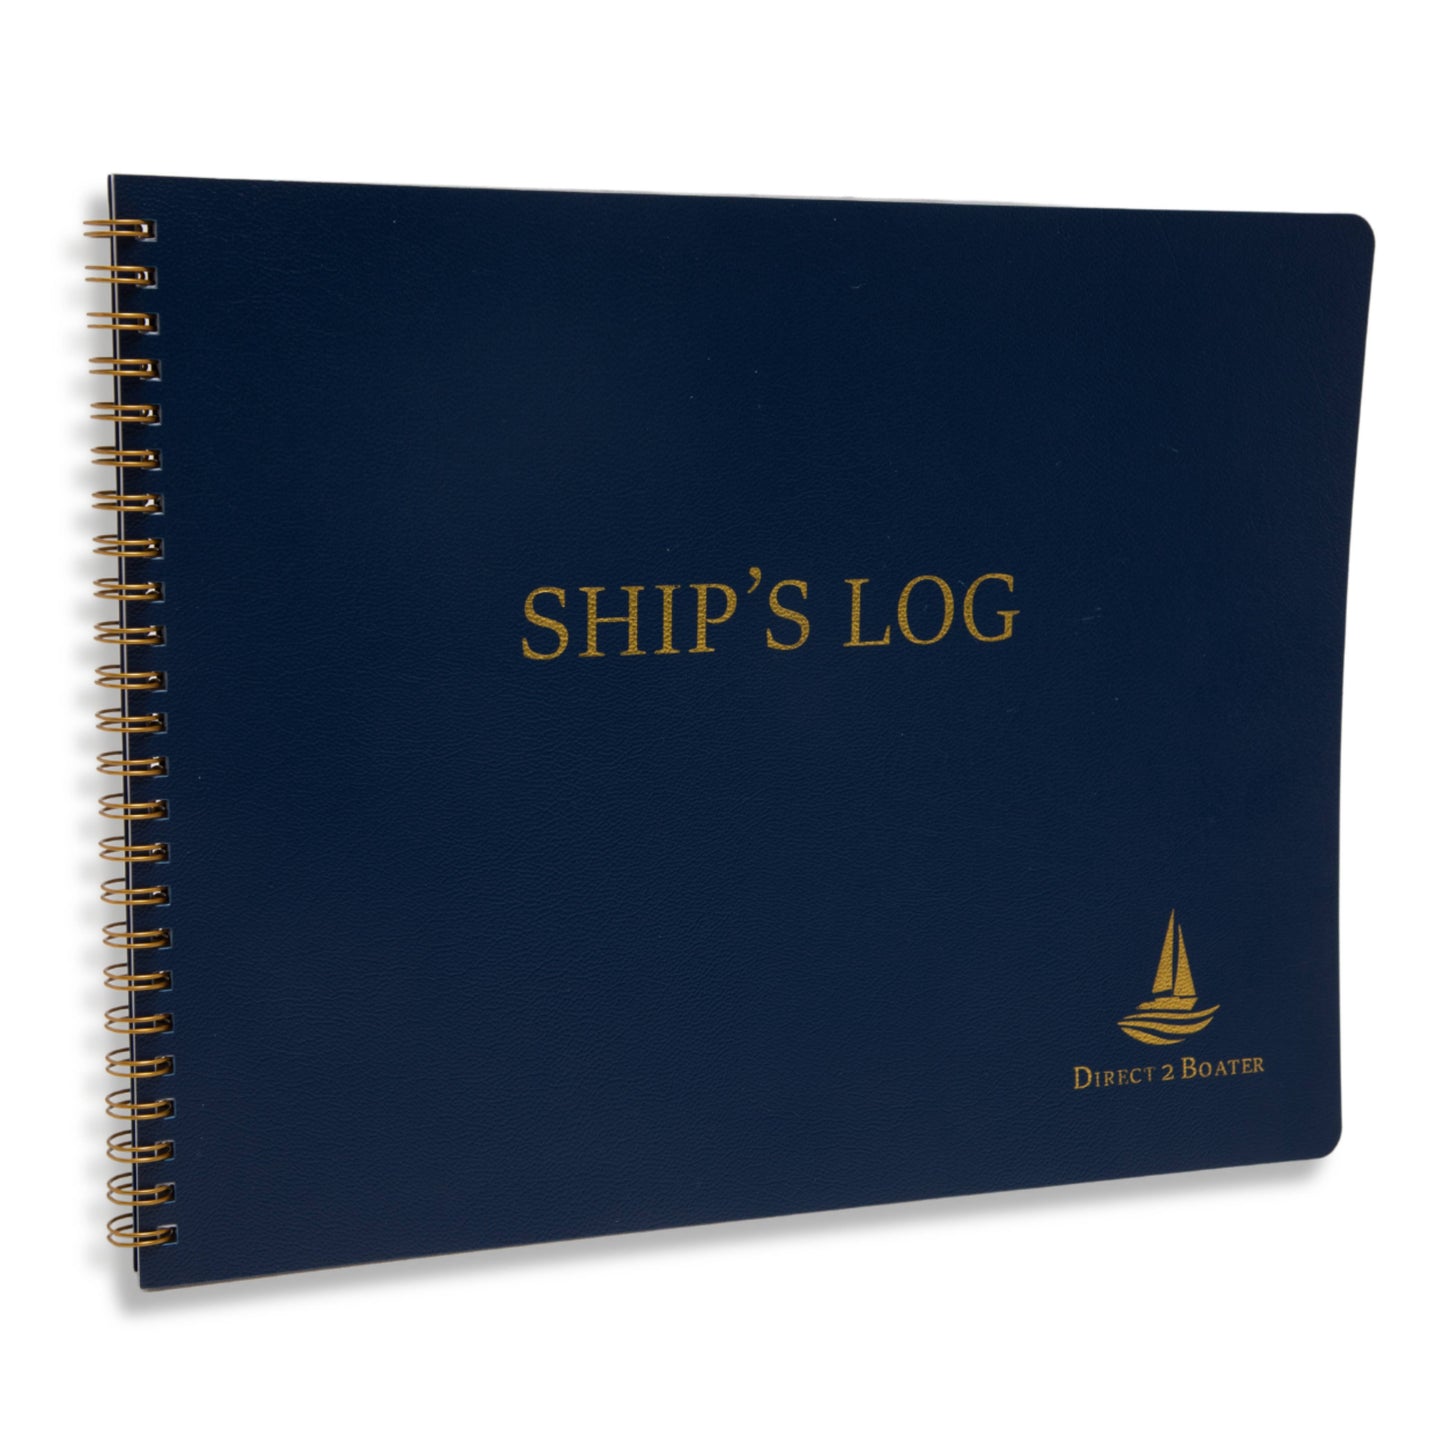 Direct 2 Boater Blue Spiral Bound Ship's & Maintenance Logs w/ Flexible Covers 100 Pages/Bk Bundle (2 Items)